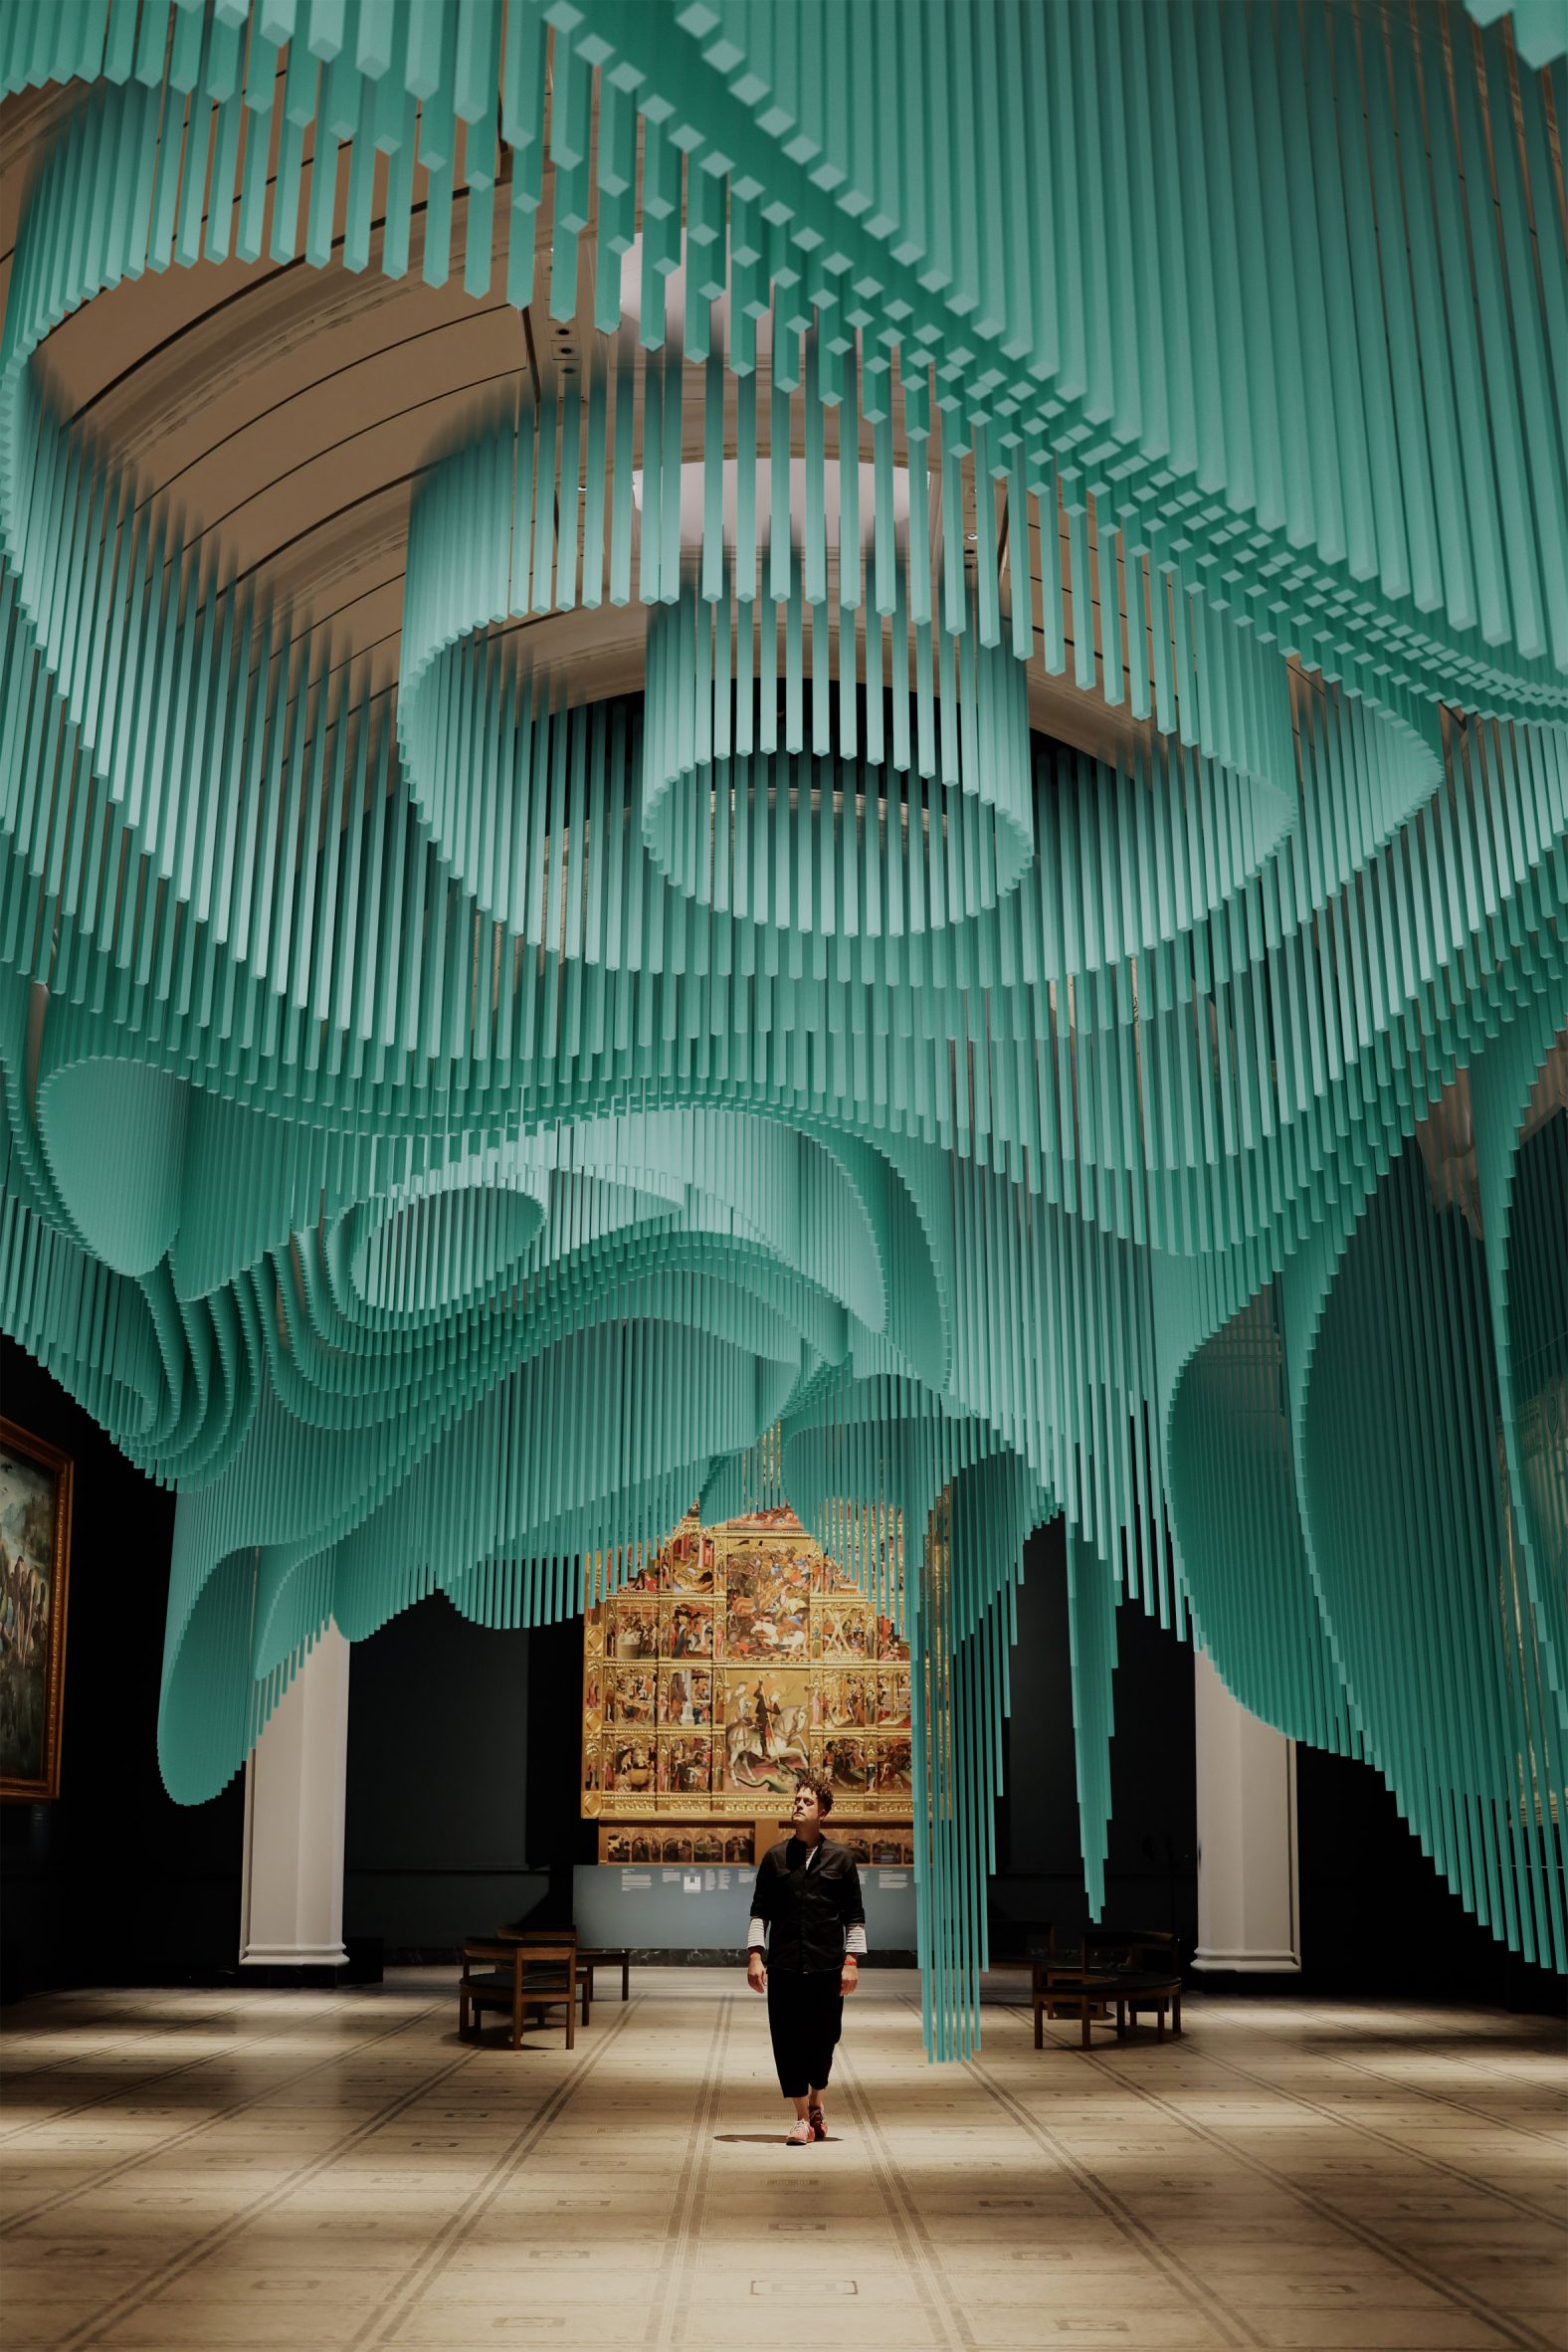 Virtual, floating structures of Medusa